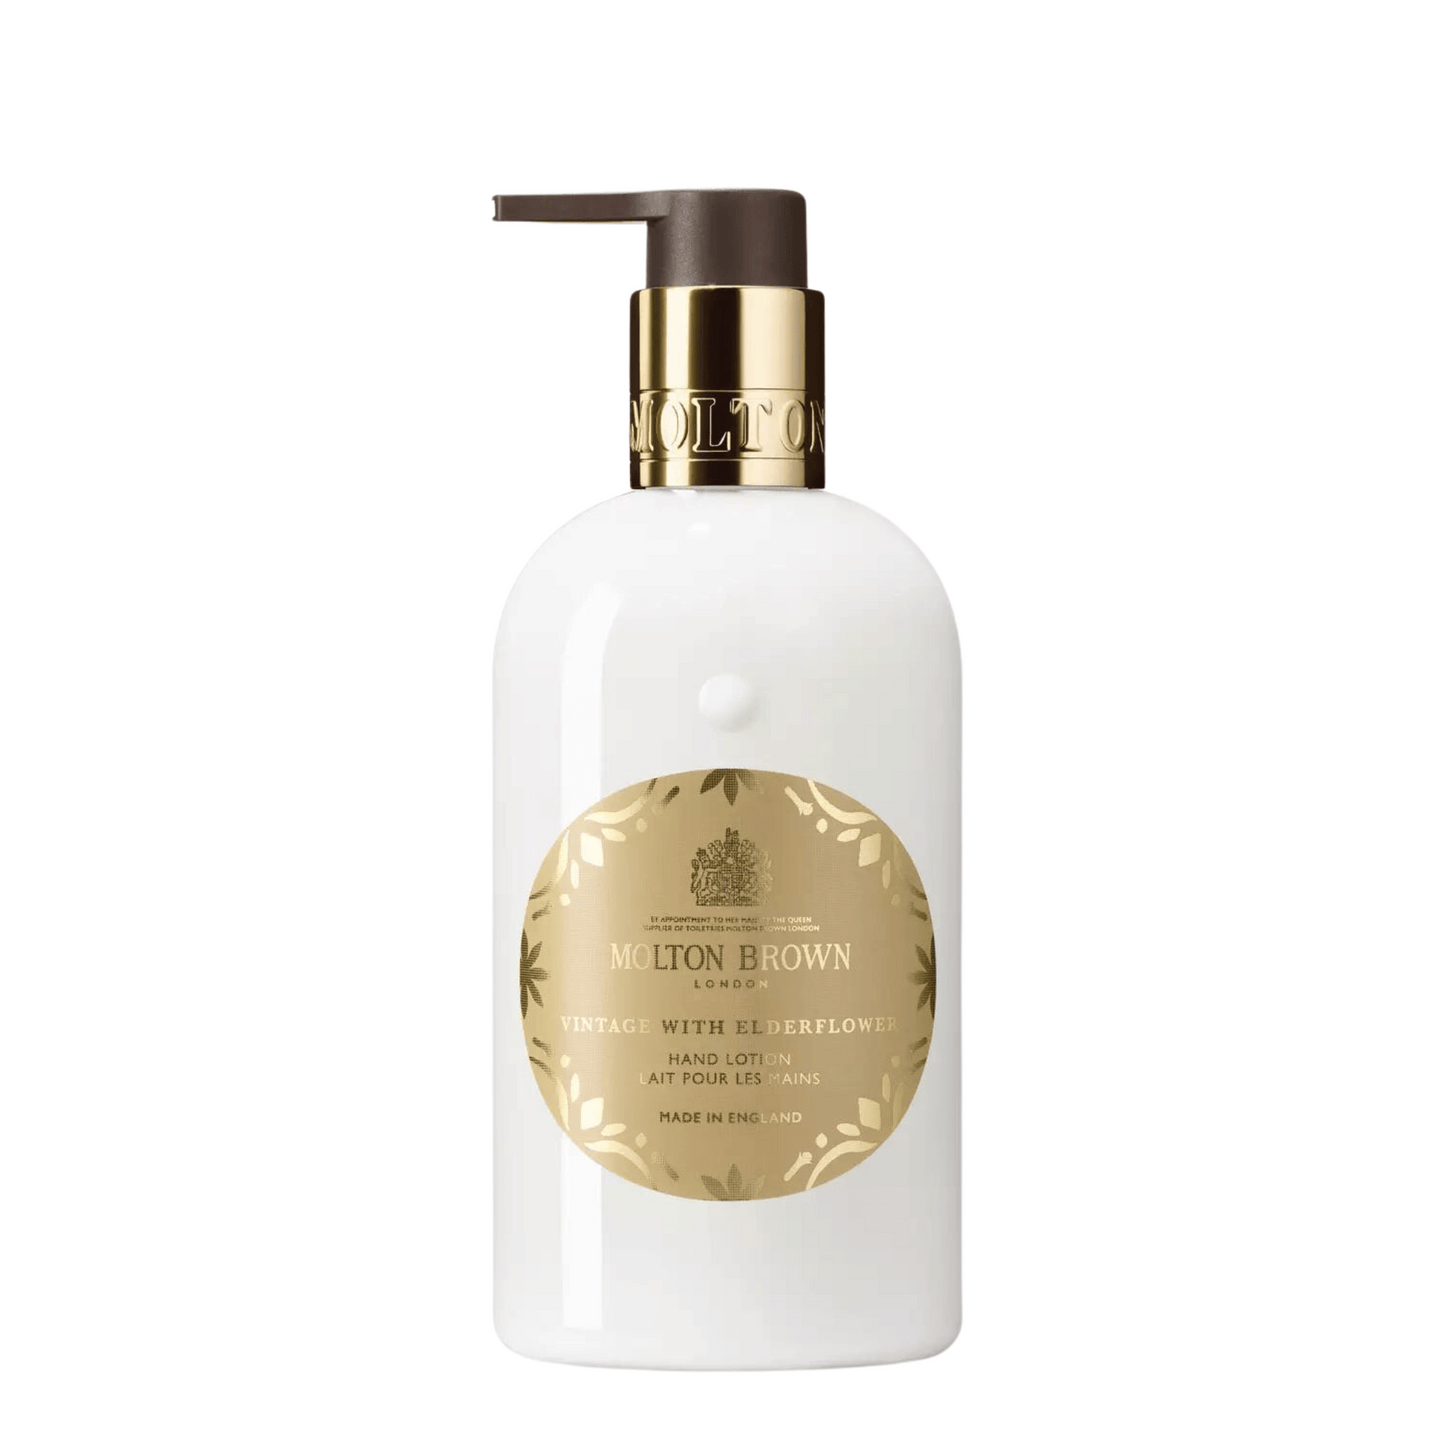 Primary Image of Vintage With Elderflower Hand Lotion